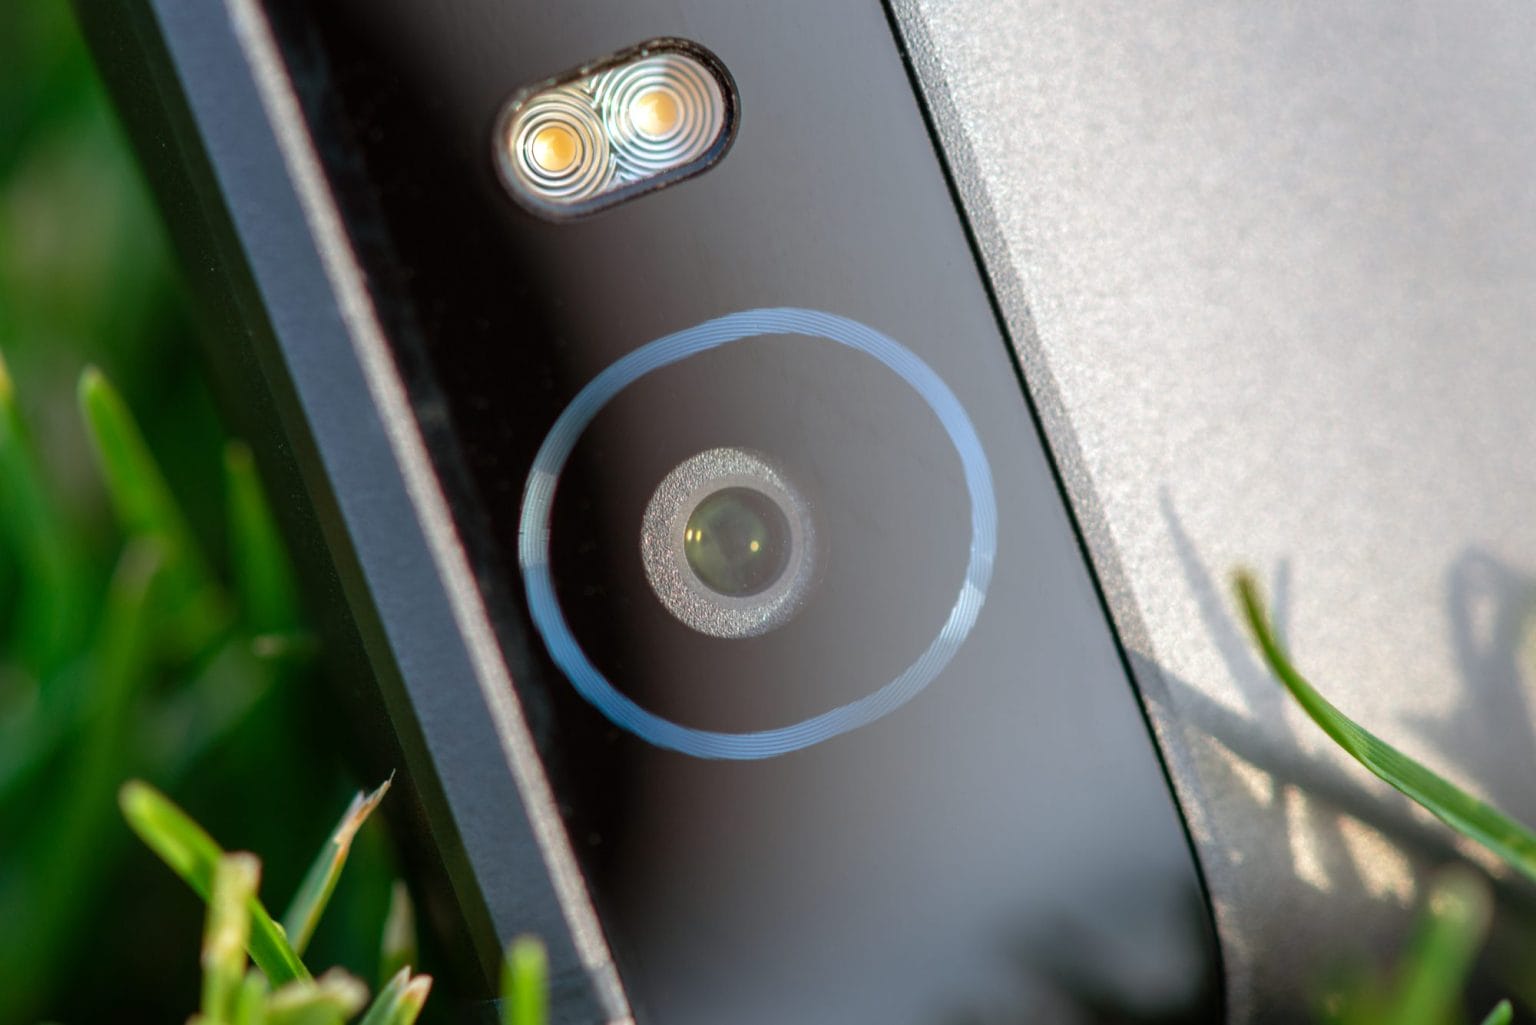 Smartphone camera with a flash close-up photo on green grass